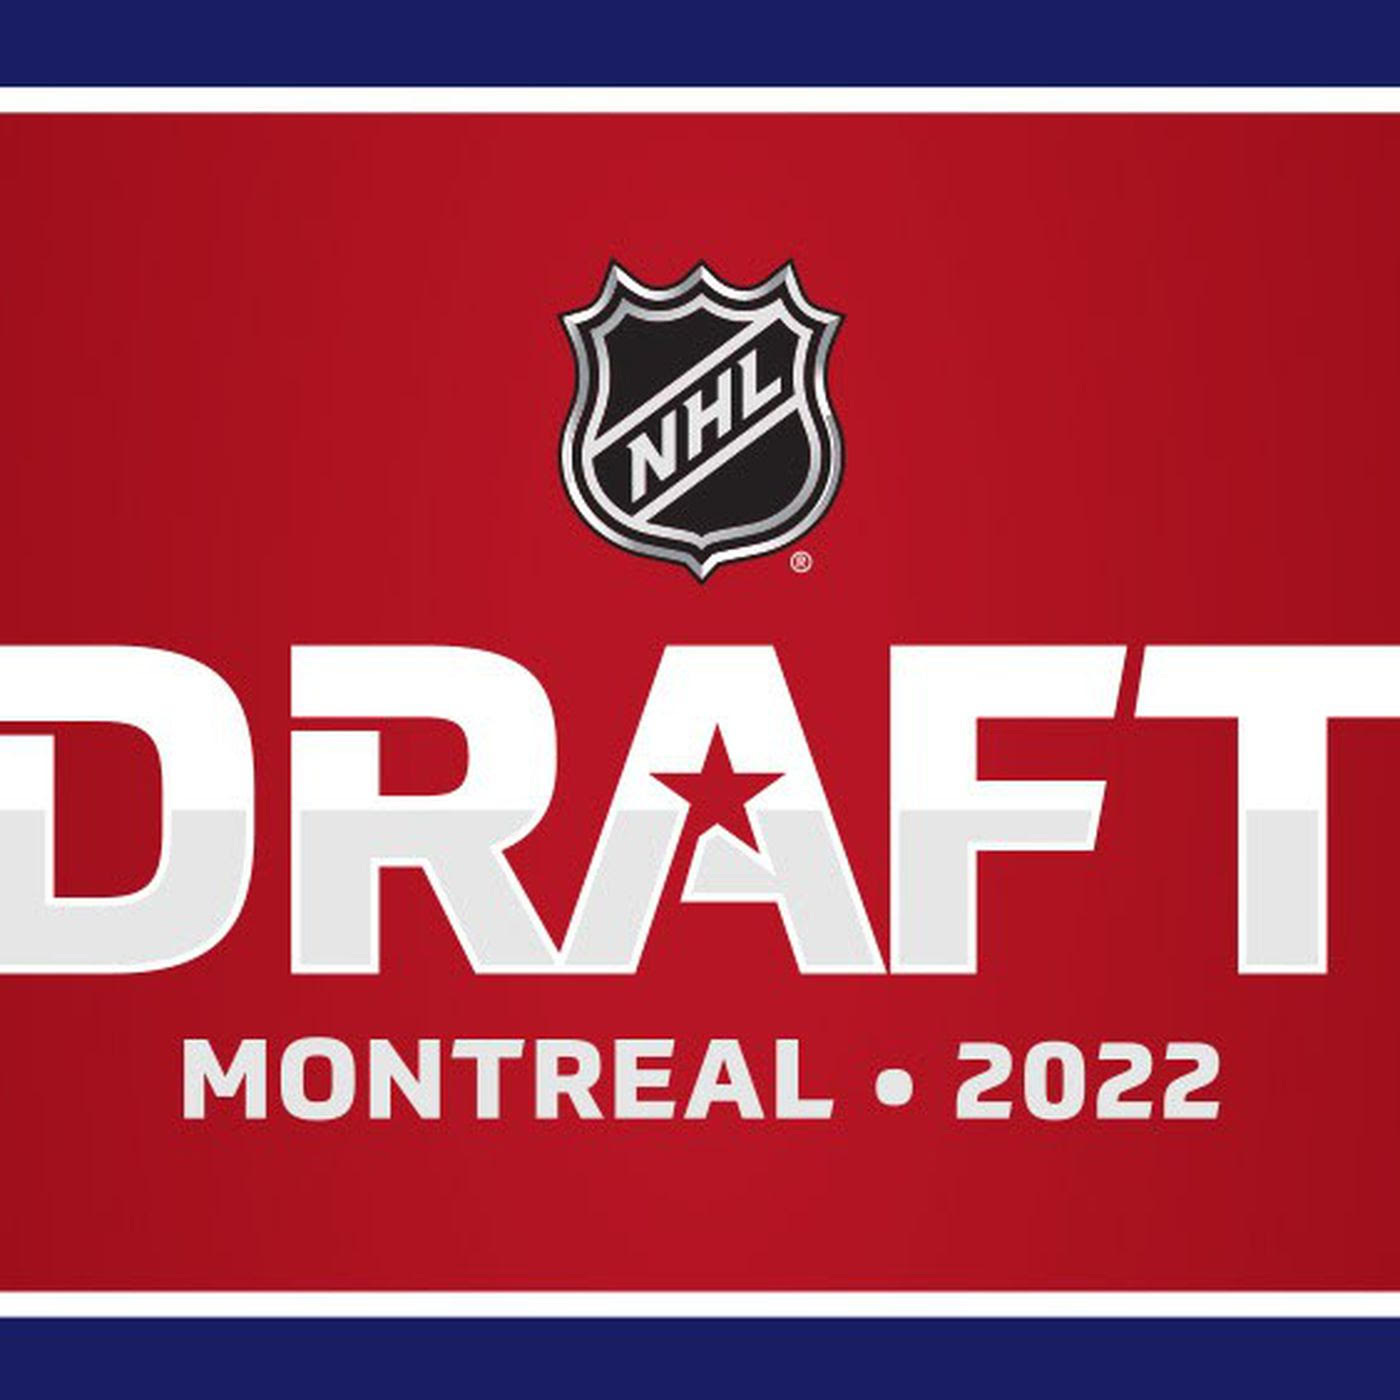 At No. 5 in the NHL draft, the Flyers will pick ...